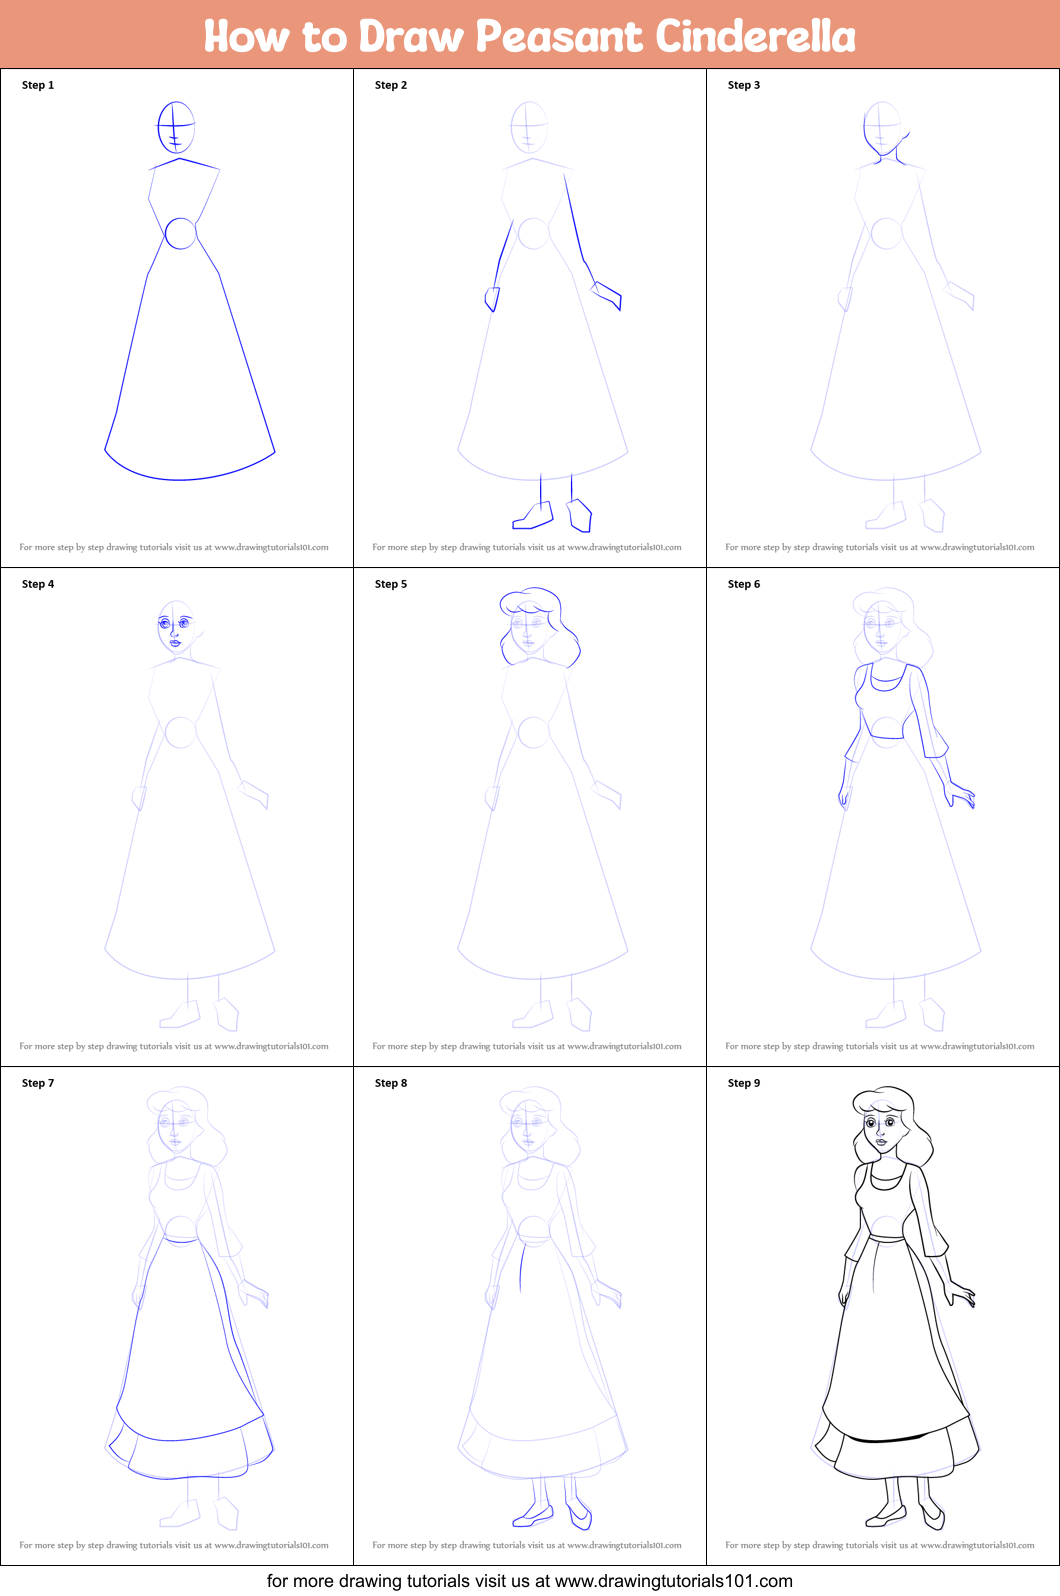 How to Draw Peasant Cinderella printable step by step drawing sheet